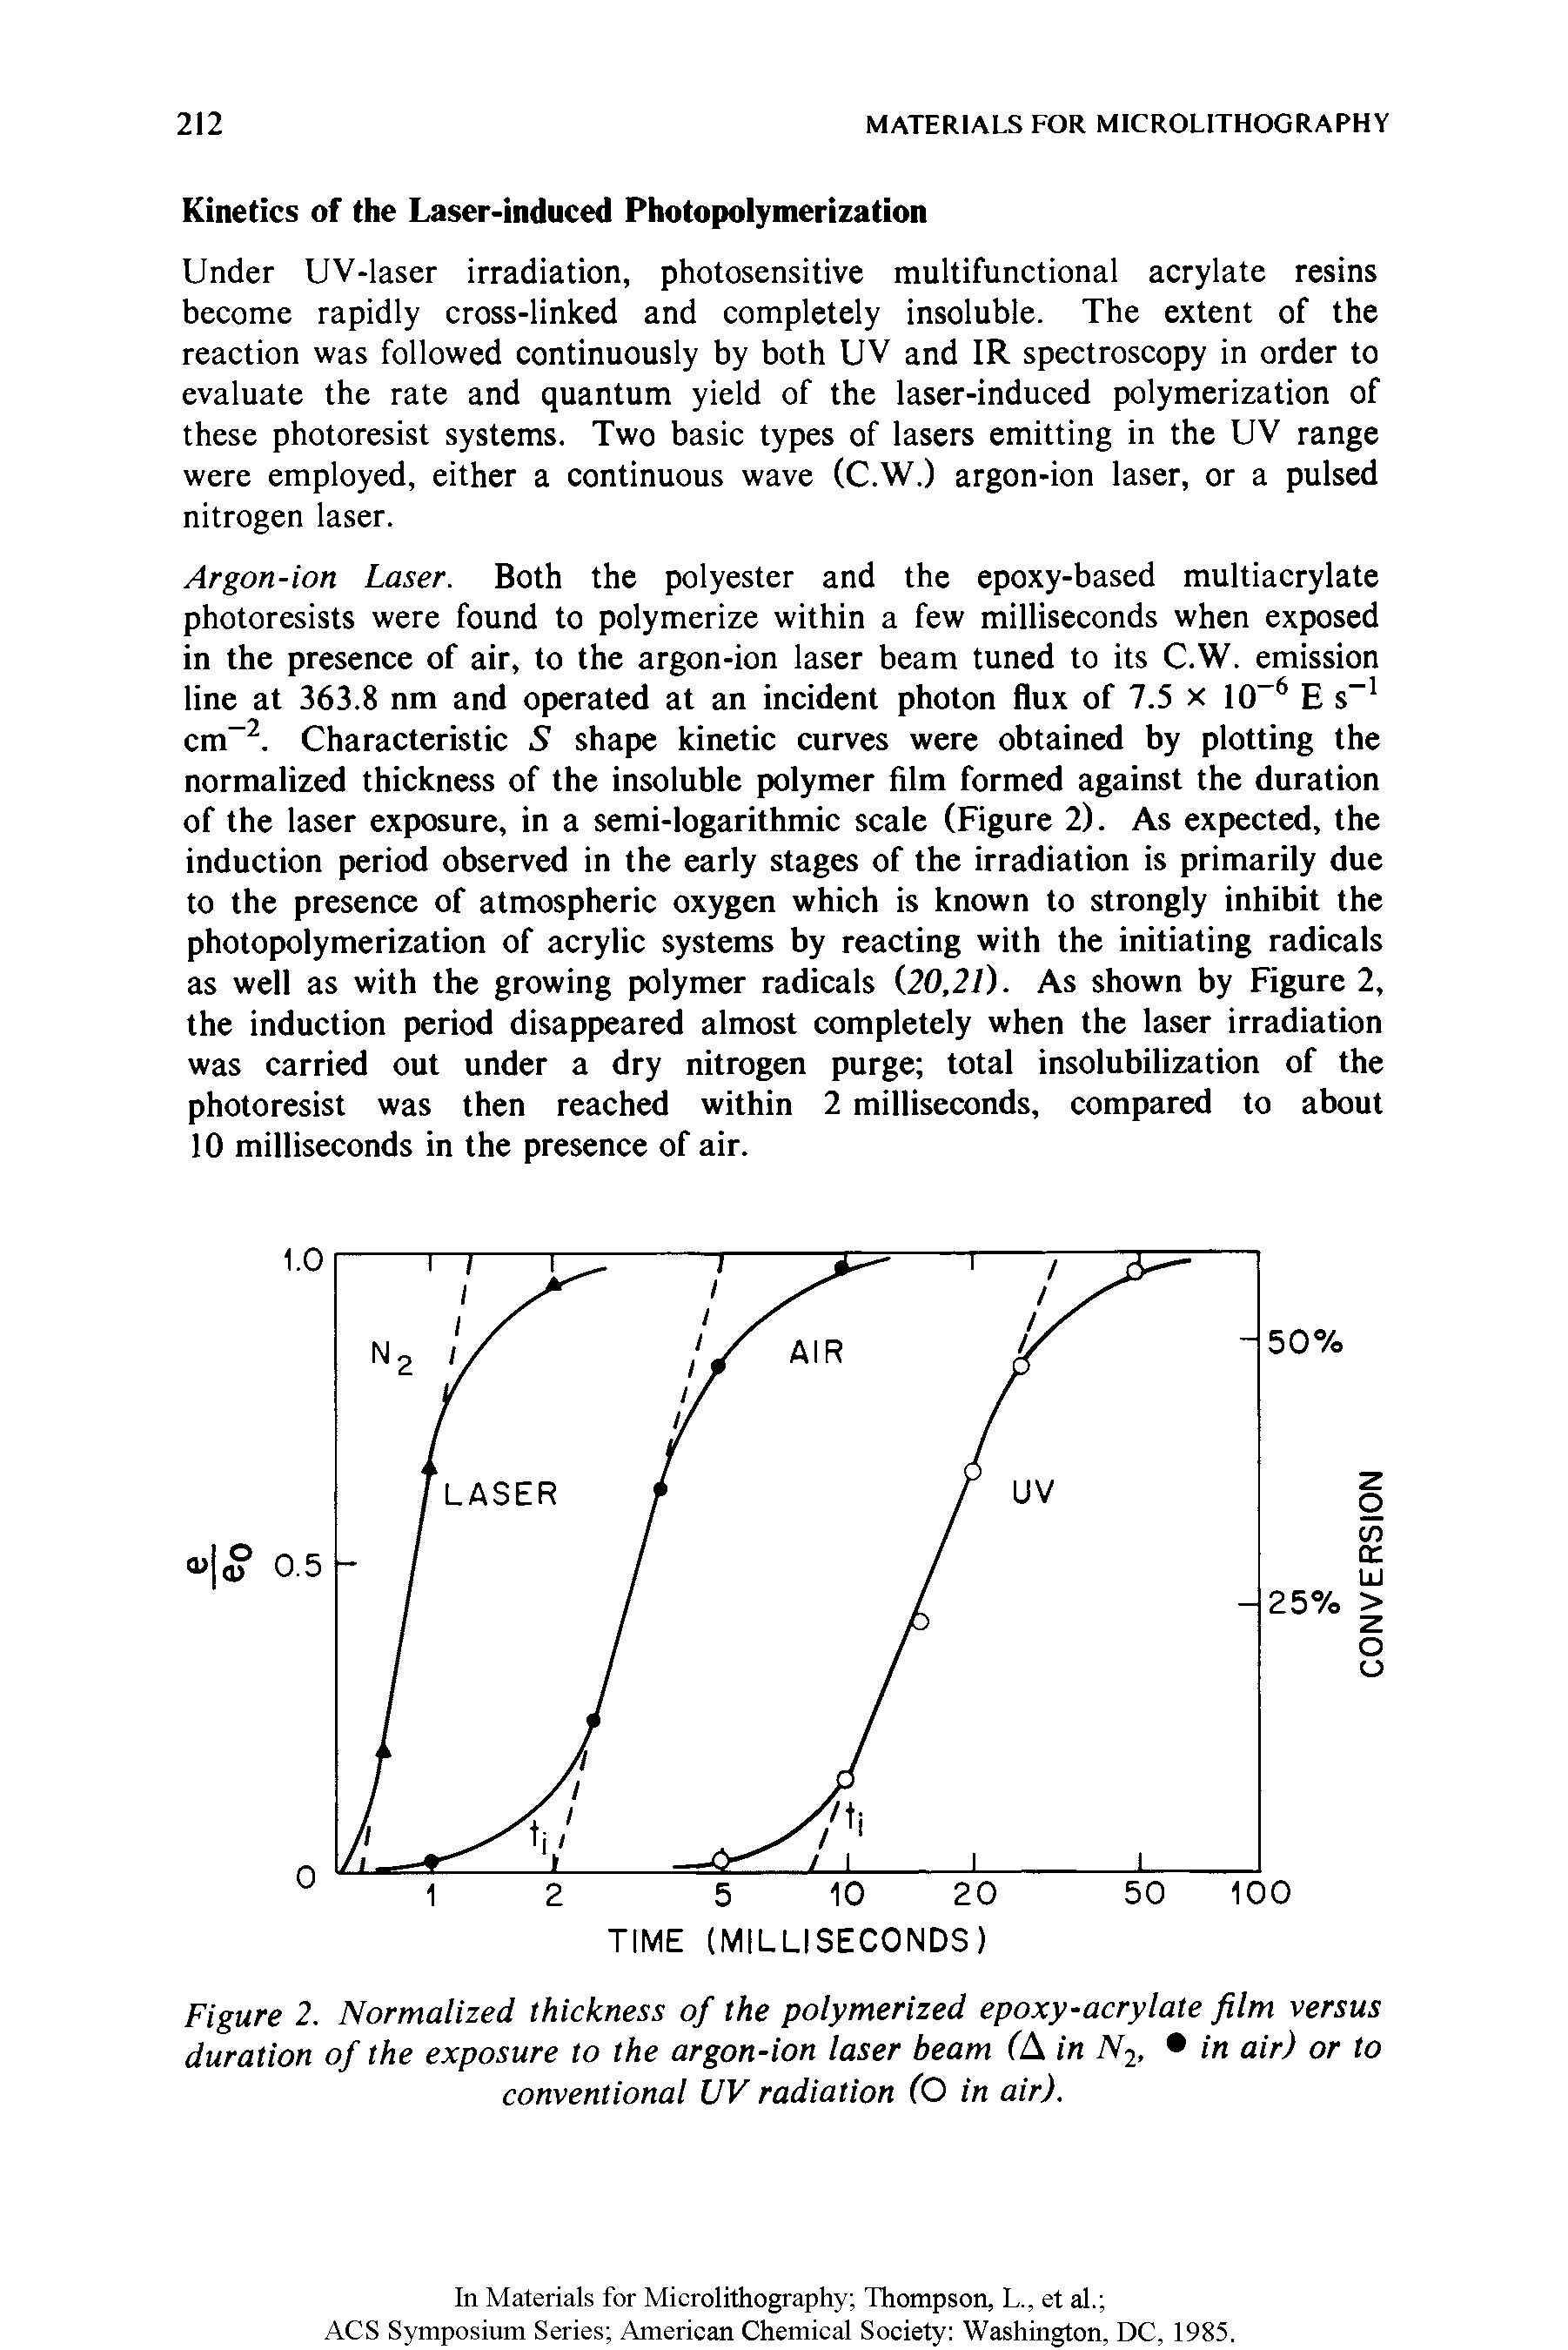 Figure 2. Normalized thickness of the polymerized epoxy-acrylate film versus duration of the exposure to the argon-ion laser beam (A in N2, in air) or to conventional UV radiation (O in air).